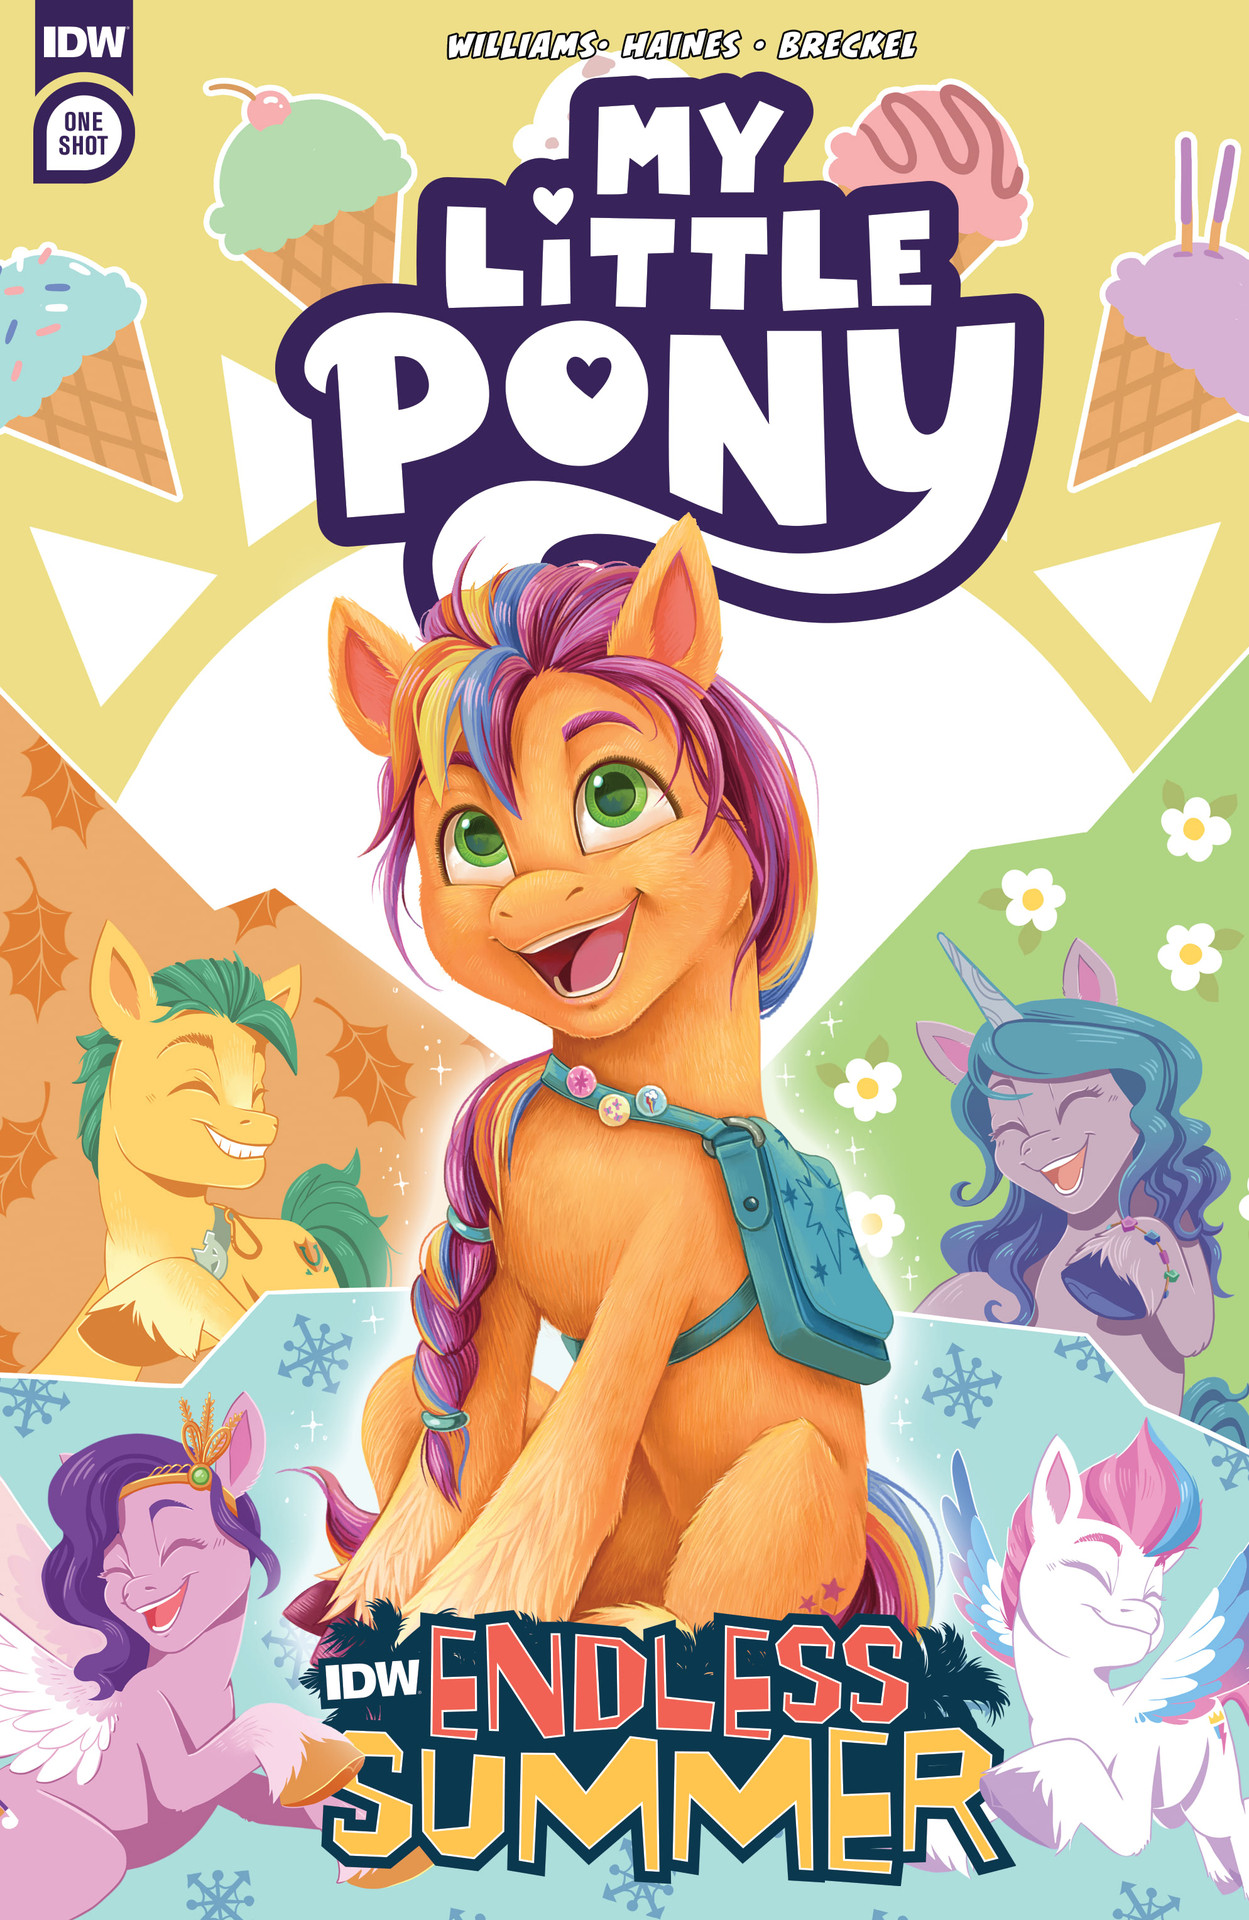 Read online IDW Endless Summer - My Little Pony comic -  Issue # Full - 1